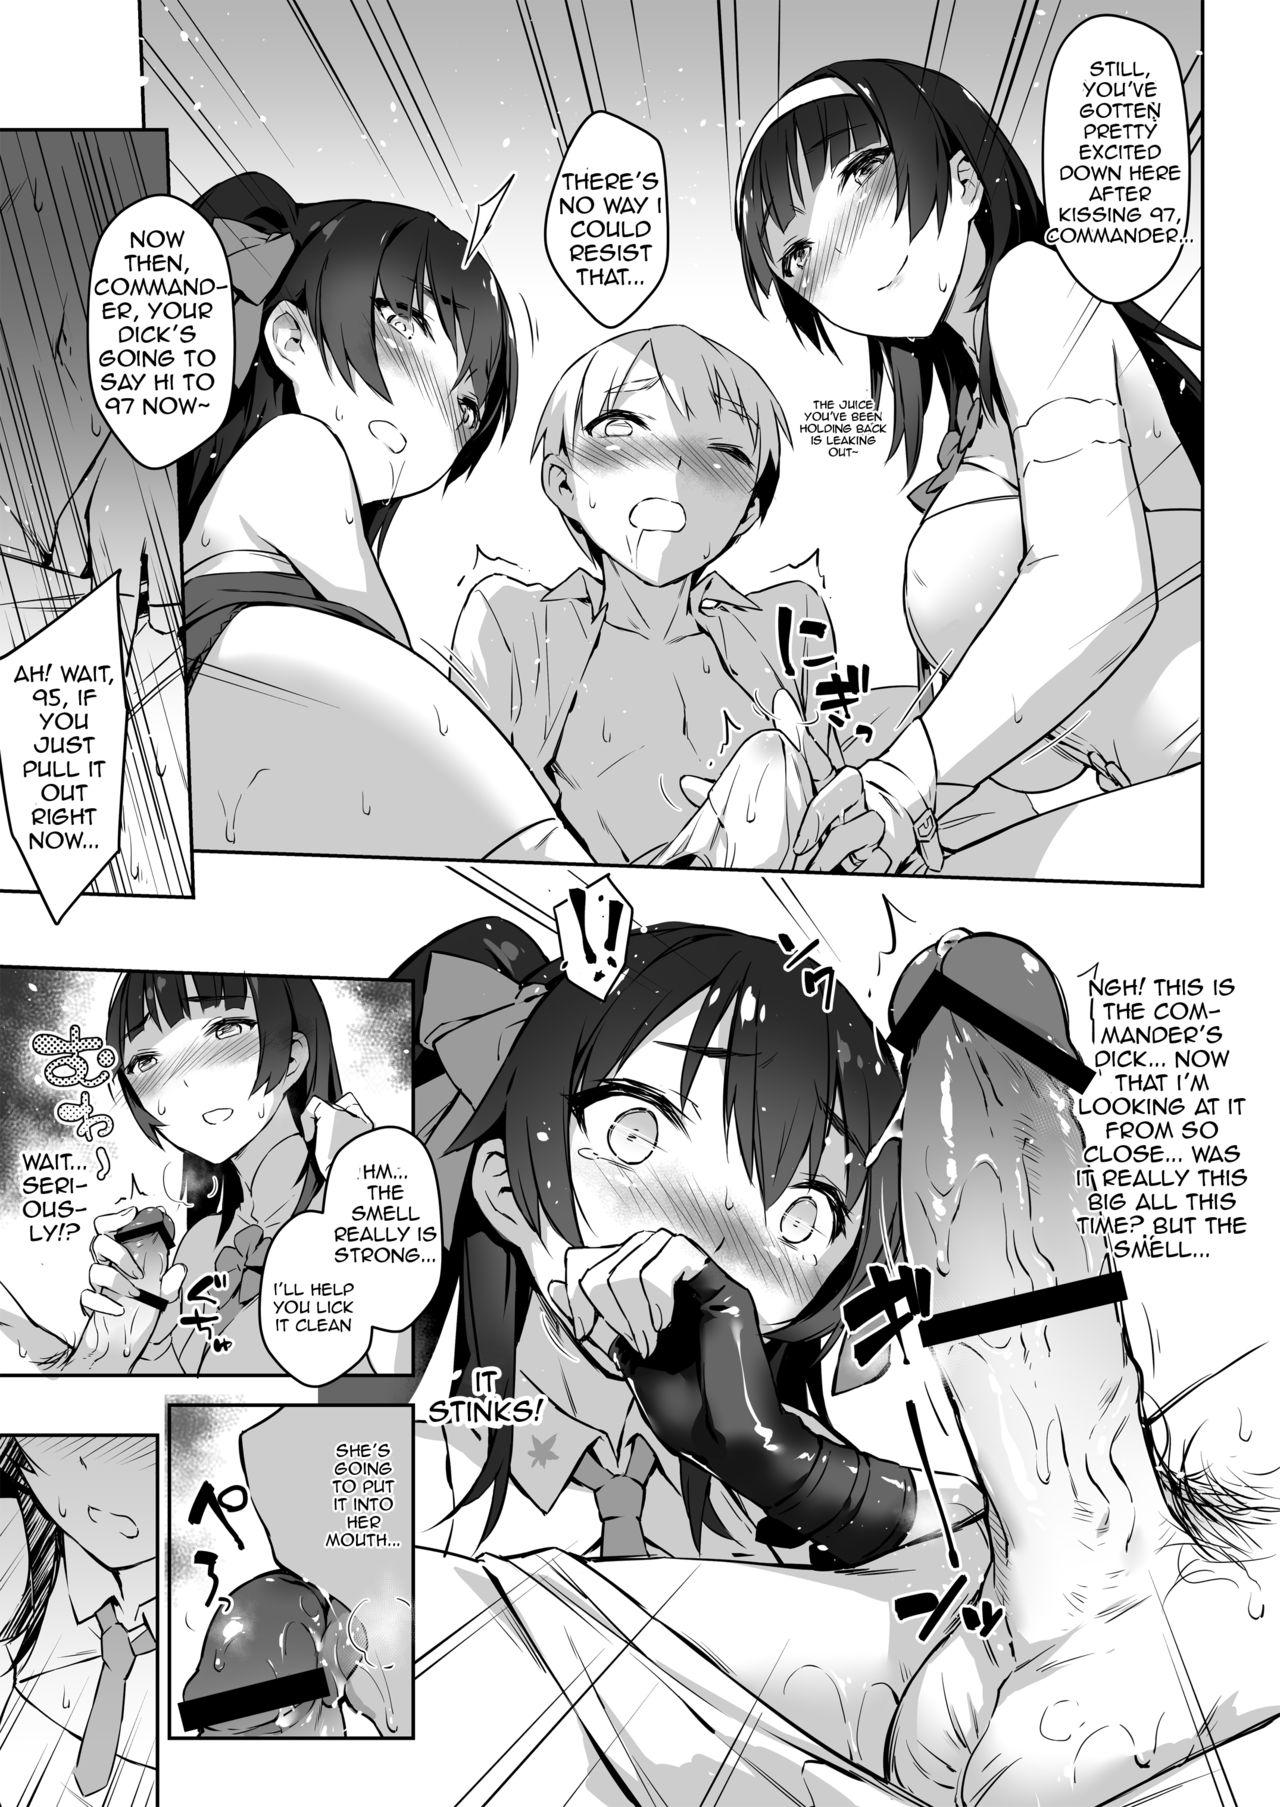 Casal Type 95 Type 97, Let Your Big Sister Teach You! - Girls frontline T Girl - Page 11